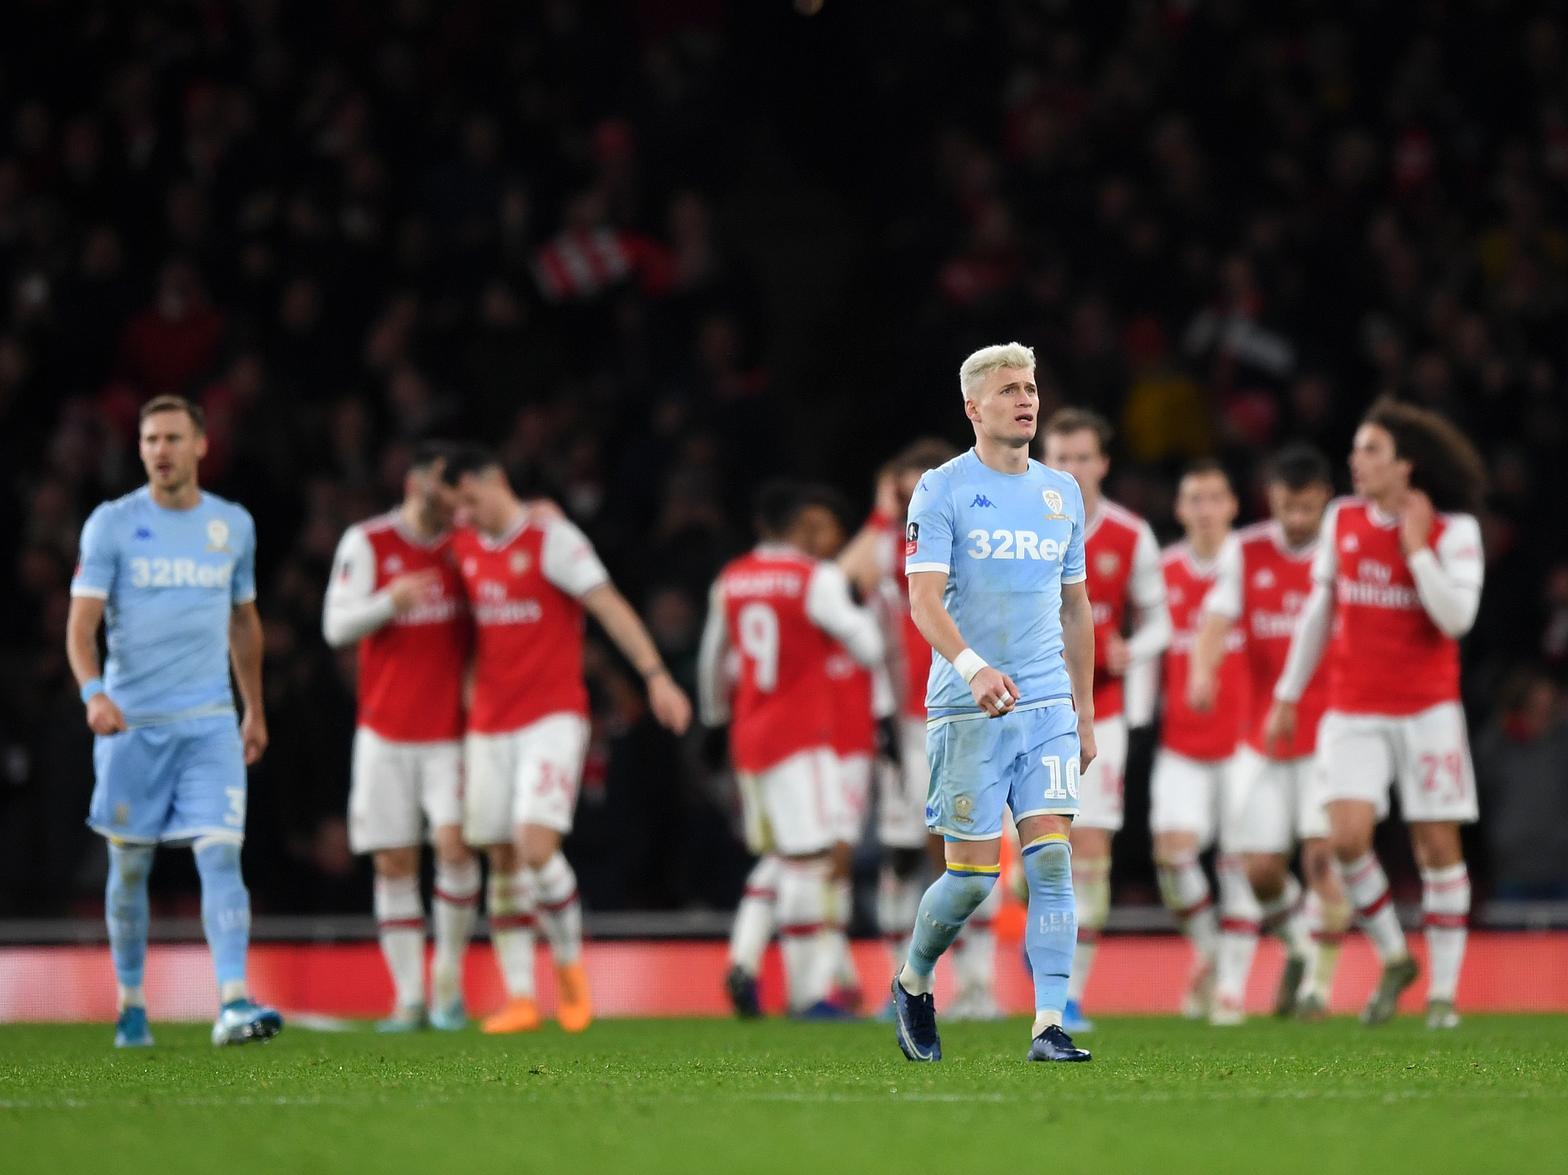 Leeds United fell to a 1-0 defeat at Arsenal on Monday evening. (Getty)